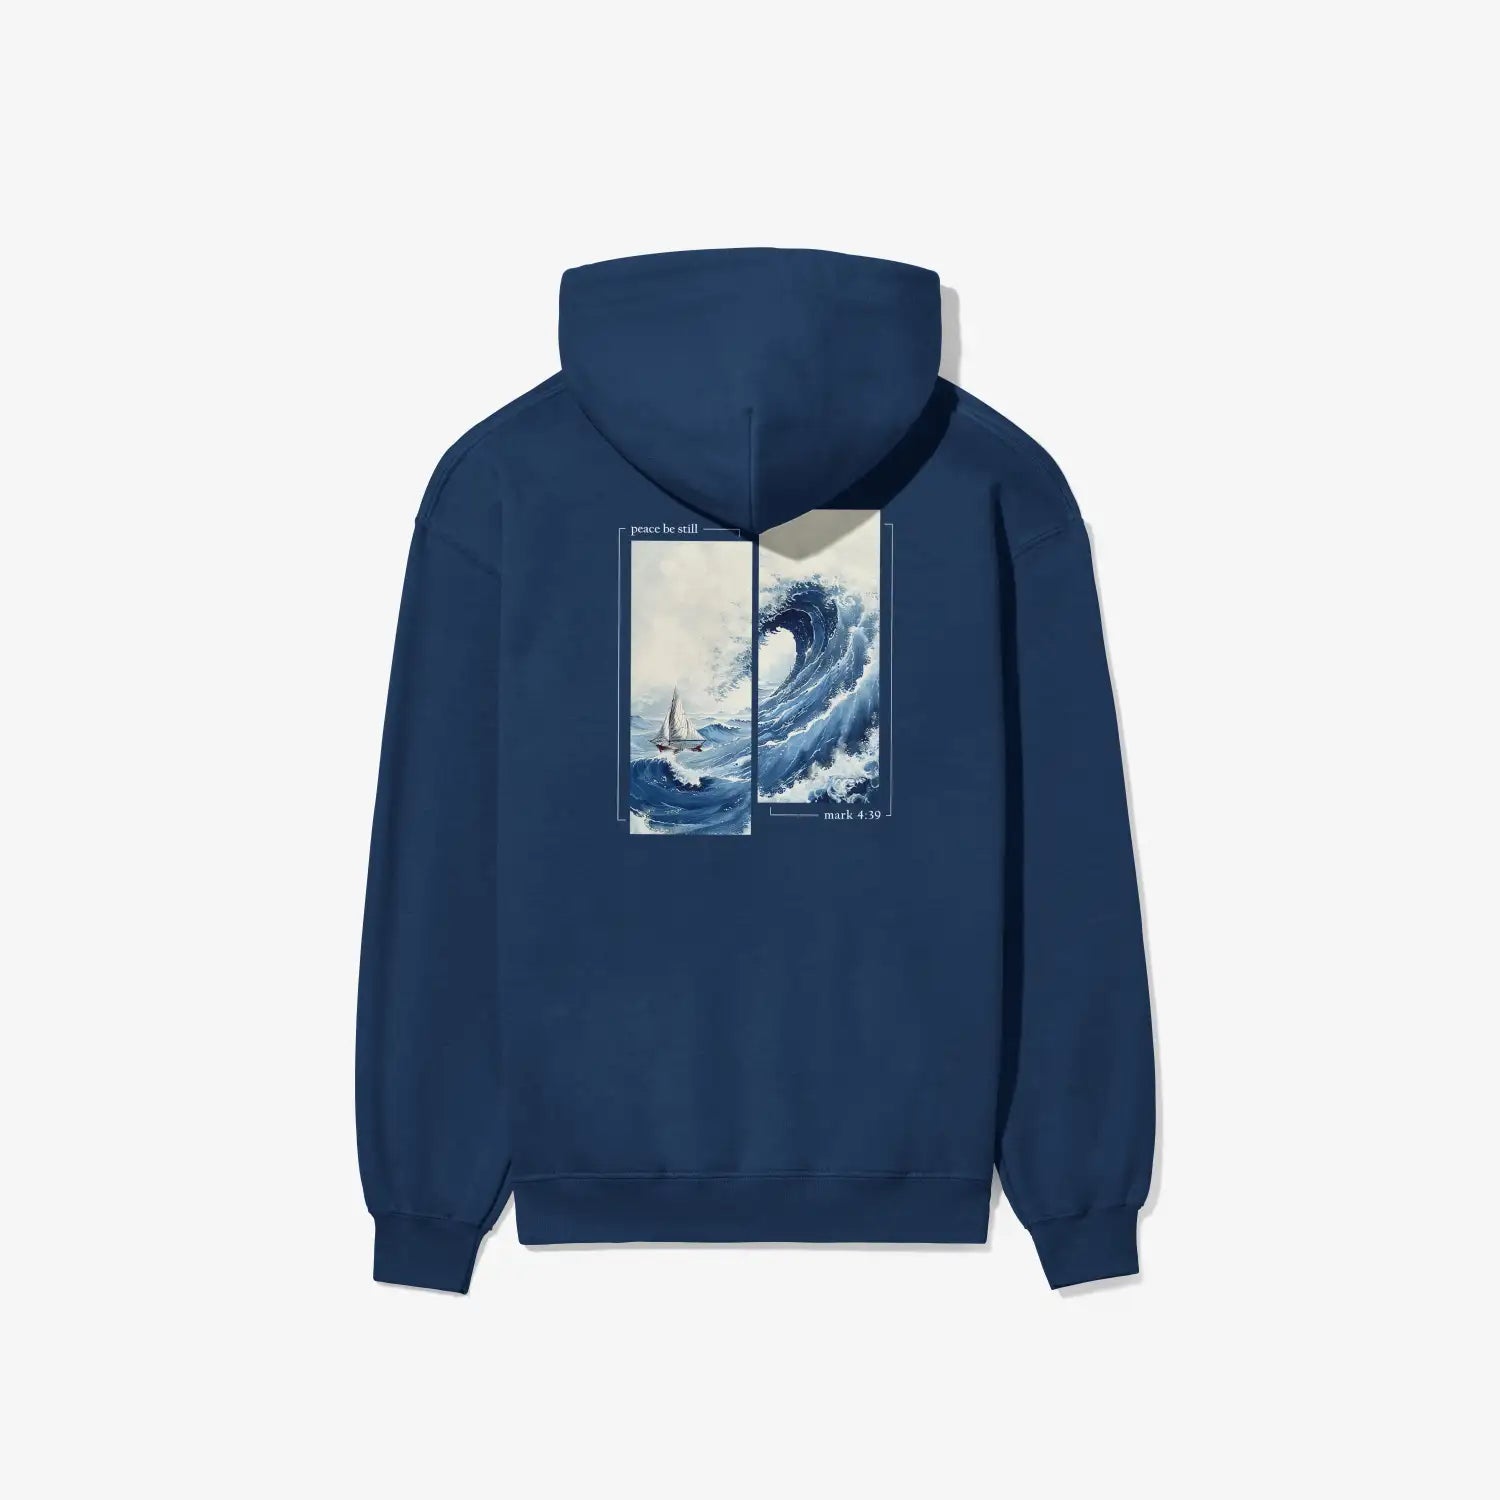 The Peace Be Still Hoodie - navy is a Christian Apparel featuring the Be Still and Know Logo.